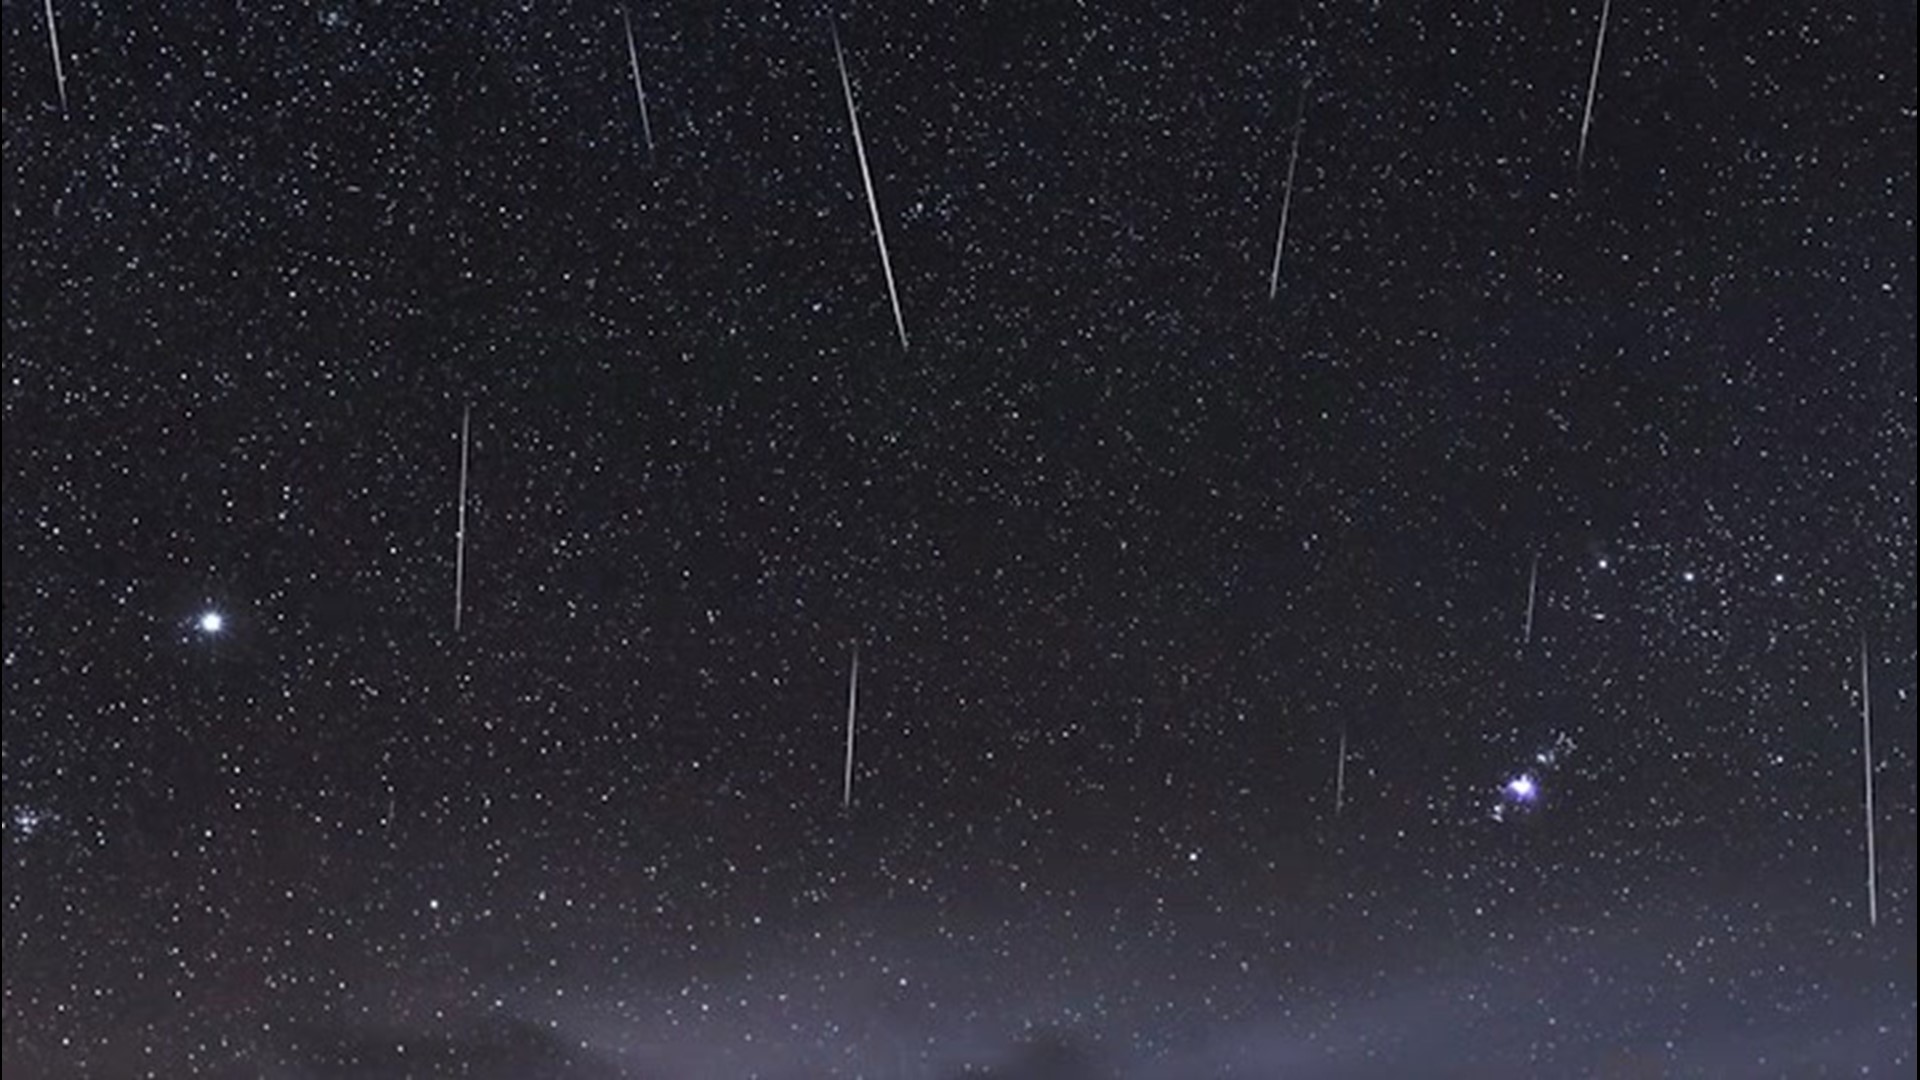 The new year begins with a quick but effective bang with the peak of the Quadrantid meteor shower. Then it slows down, capping off the end of January with a bright full moon.